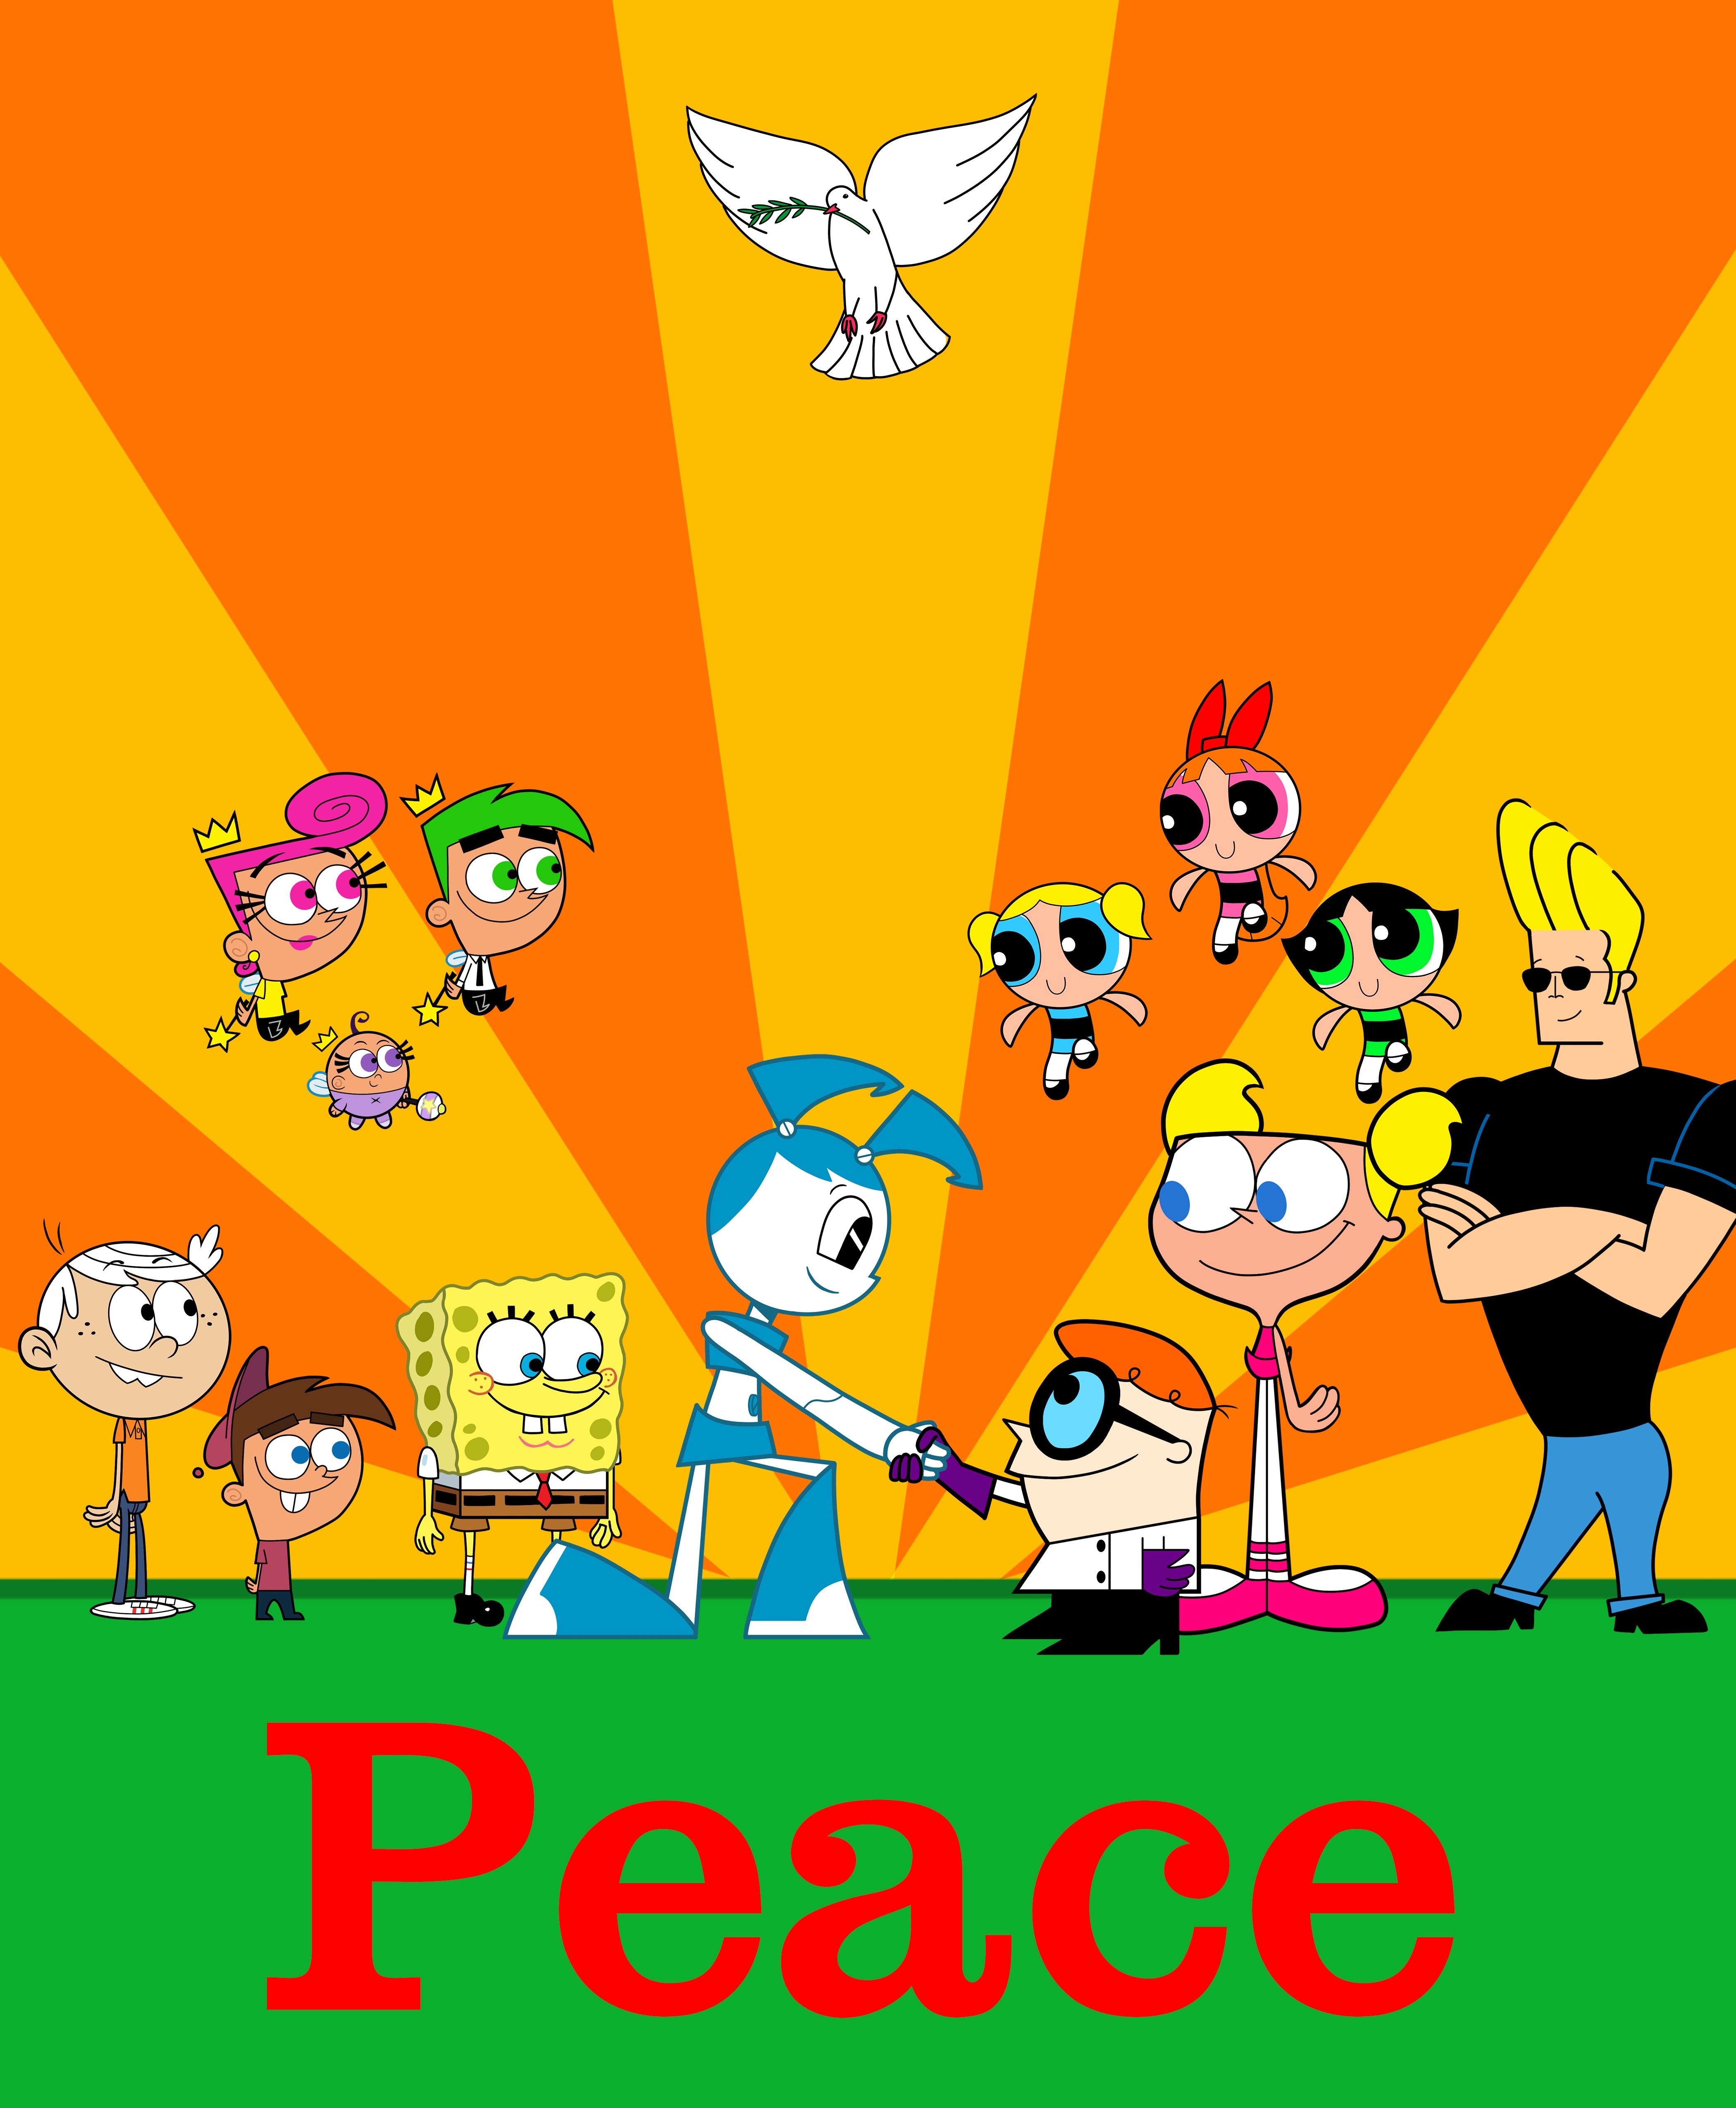 Nickelodeon and Cartoon Network making peace. by DMarin2000 on DeviantArt